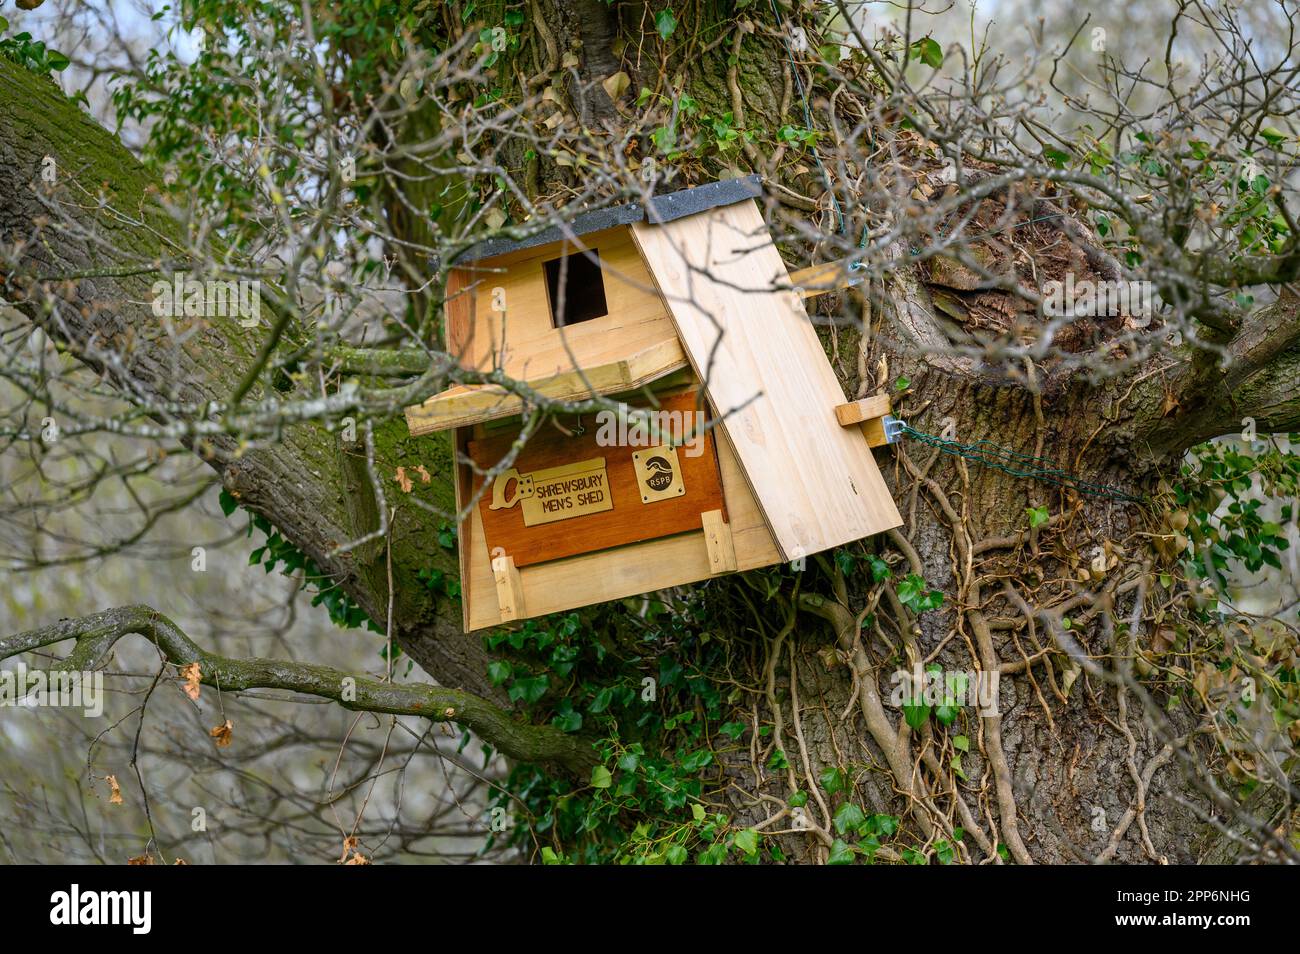 Badly erected, wooden owl nest box in a large tree on the edge of a field. Stock Photo